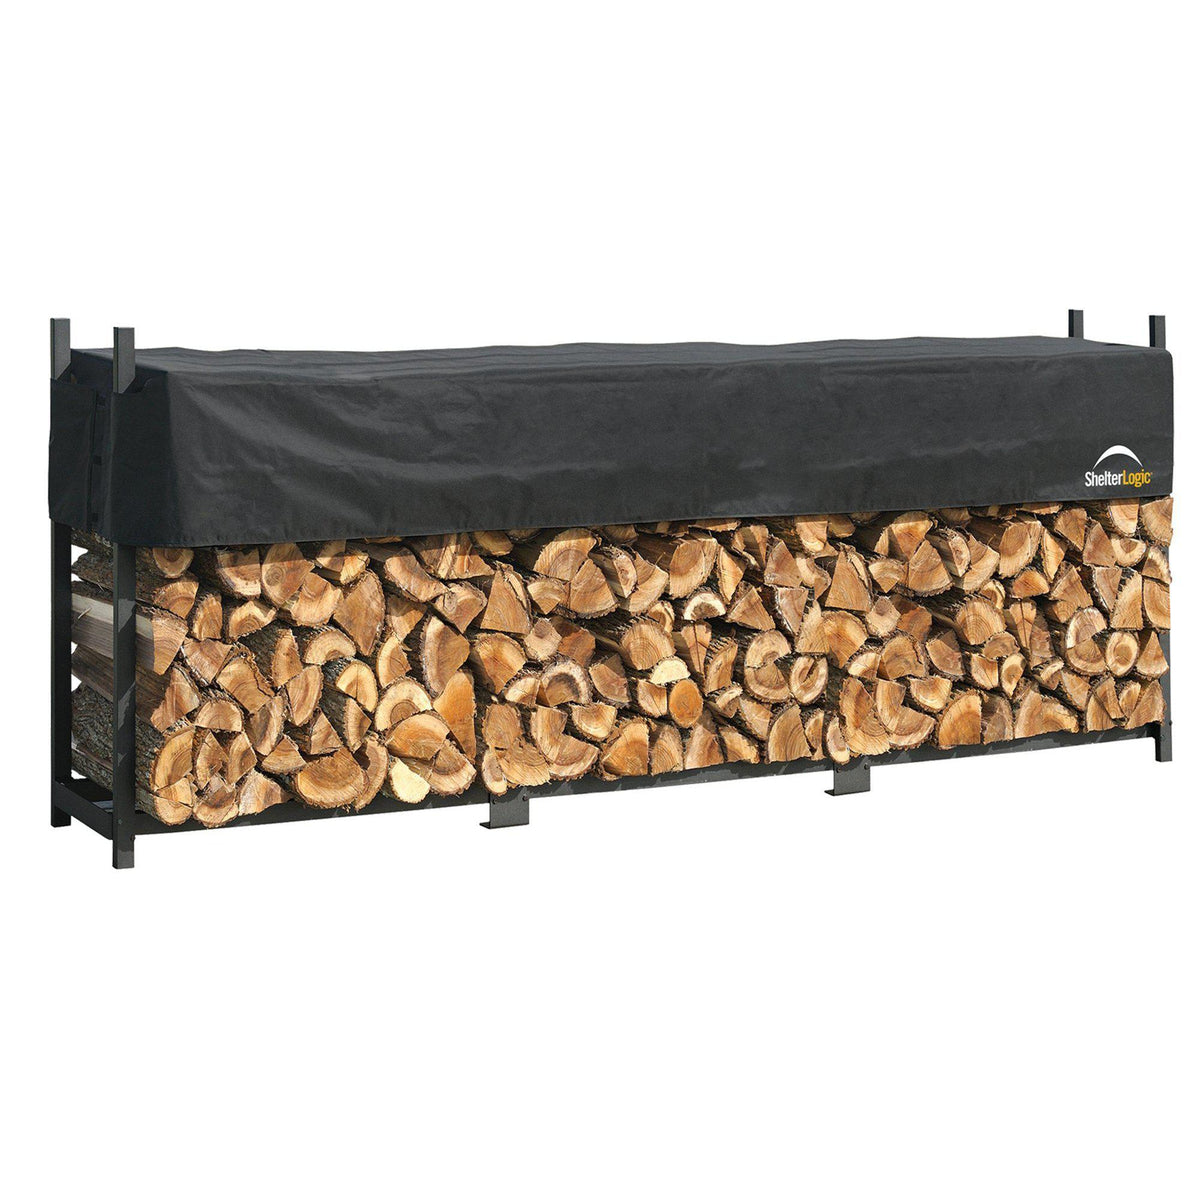 ShelterLogic Ultra Duty Firewood Rack with Cover, 4 ft.